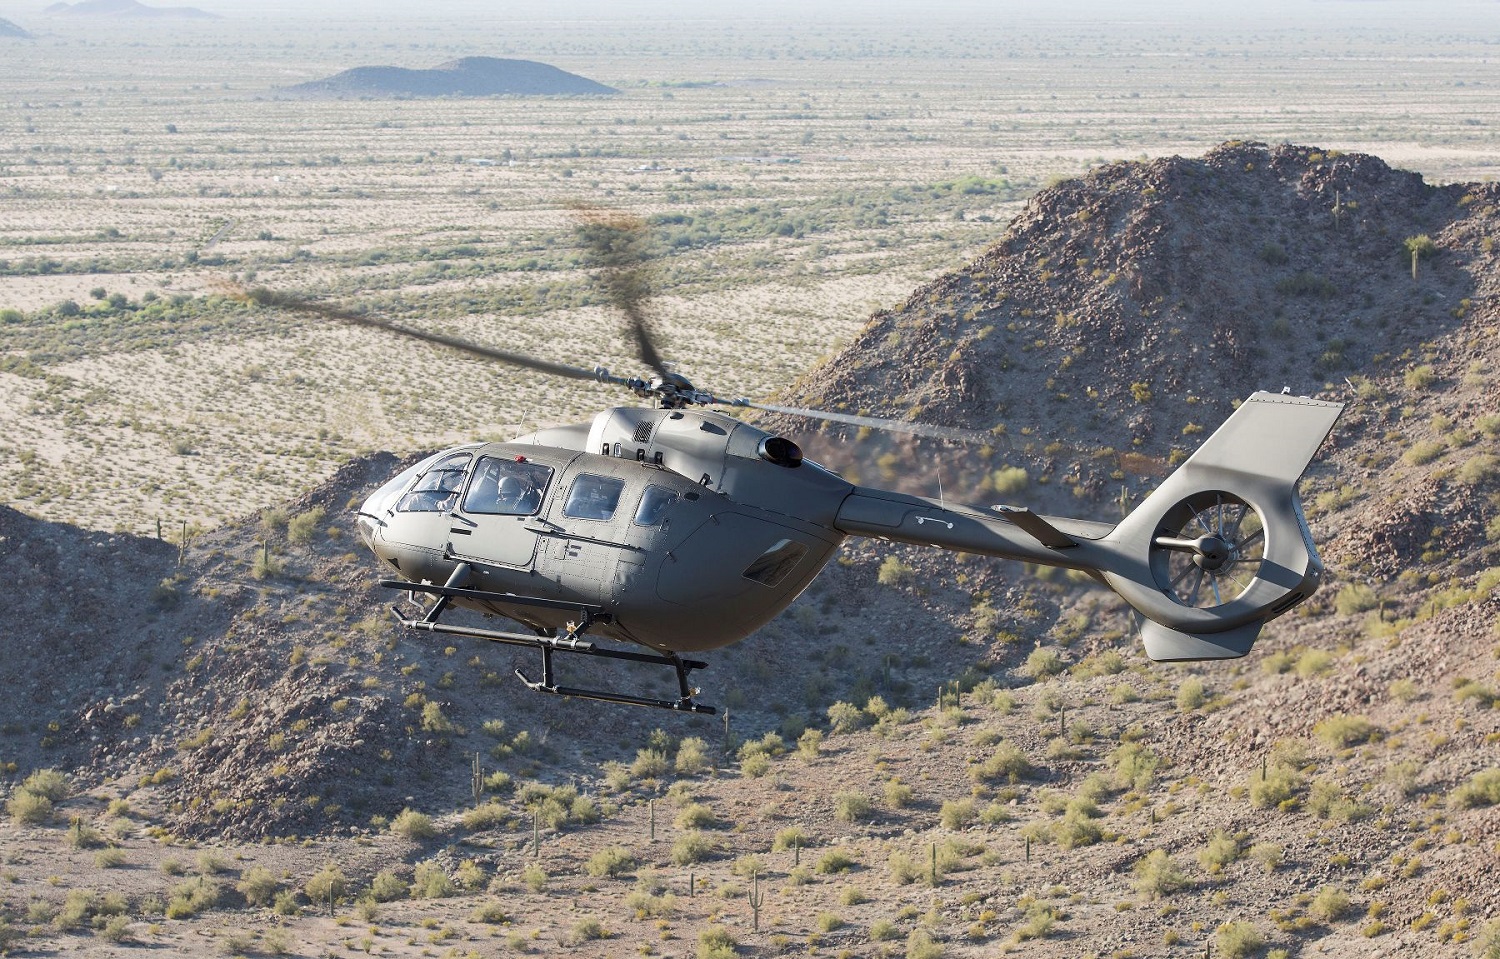 A concept rendering of the newest Lakota helicopter variant, the UH-72B, expected to enter the U.S. Army fleet in 2021.